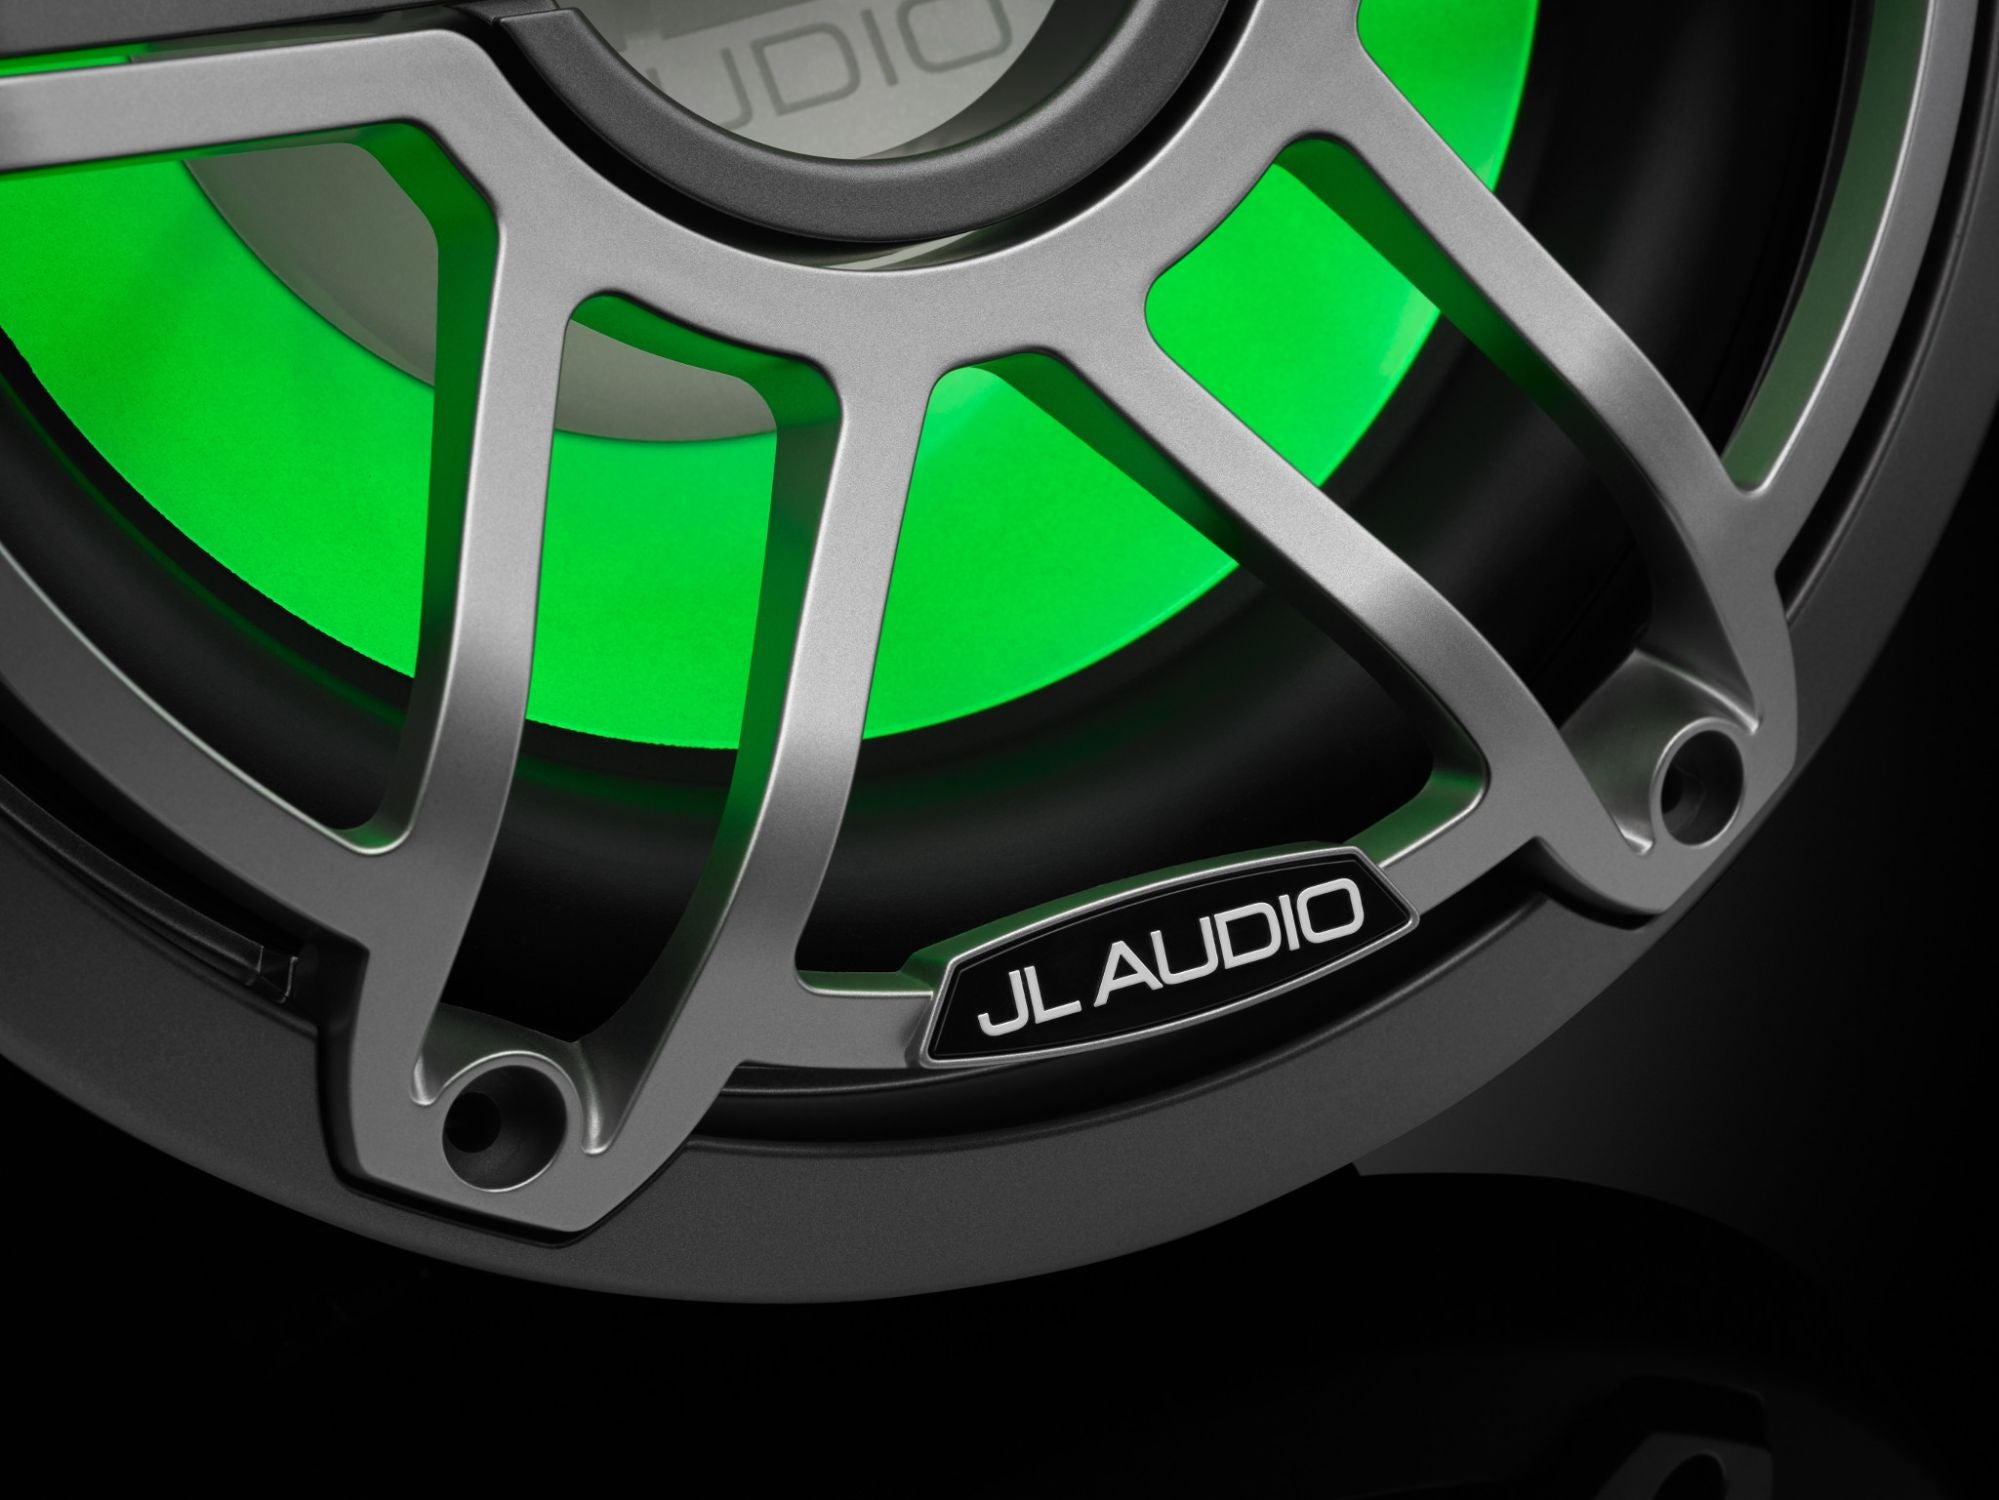 Detail of M6-10IB-S-GmTi-i-4 Subwoofer Lit with Green